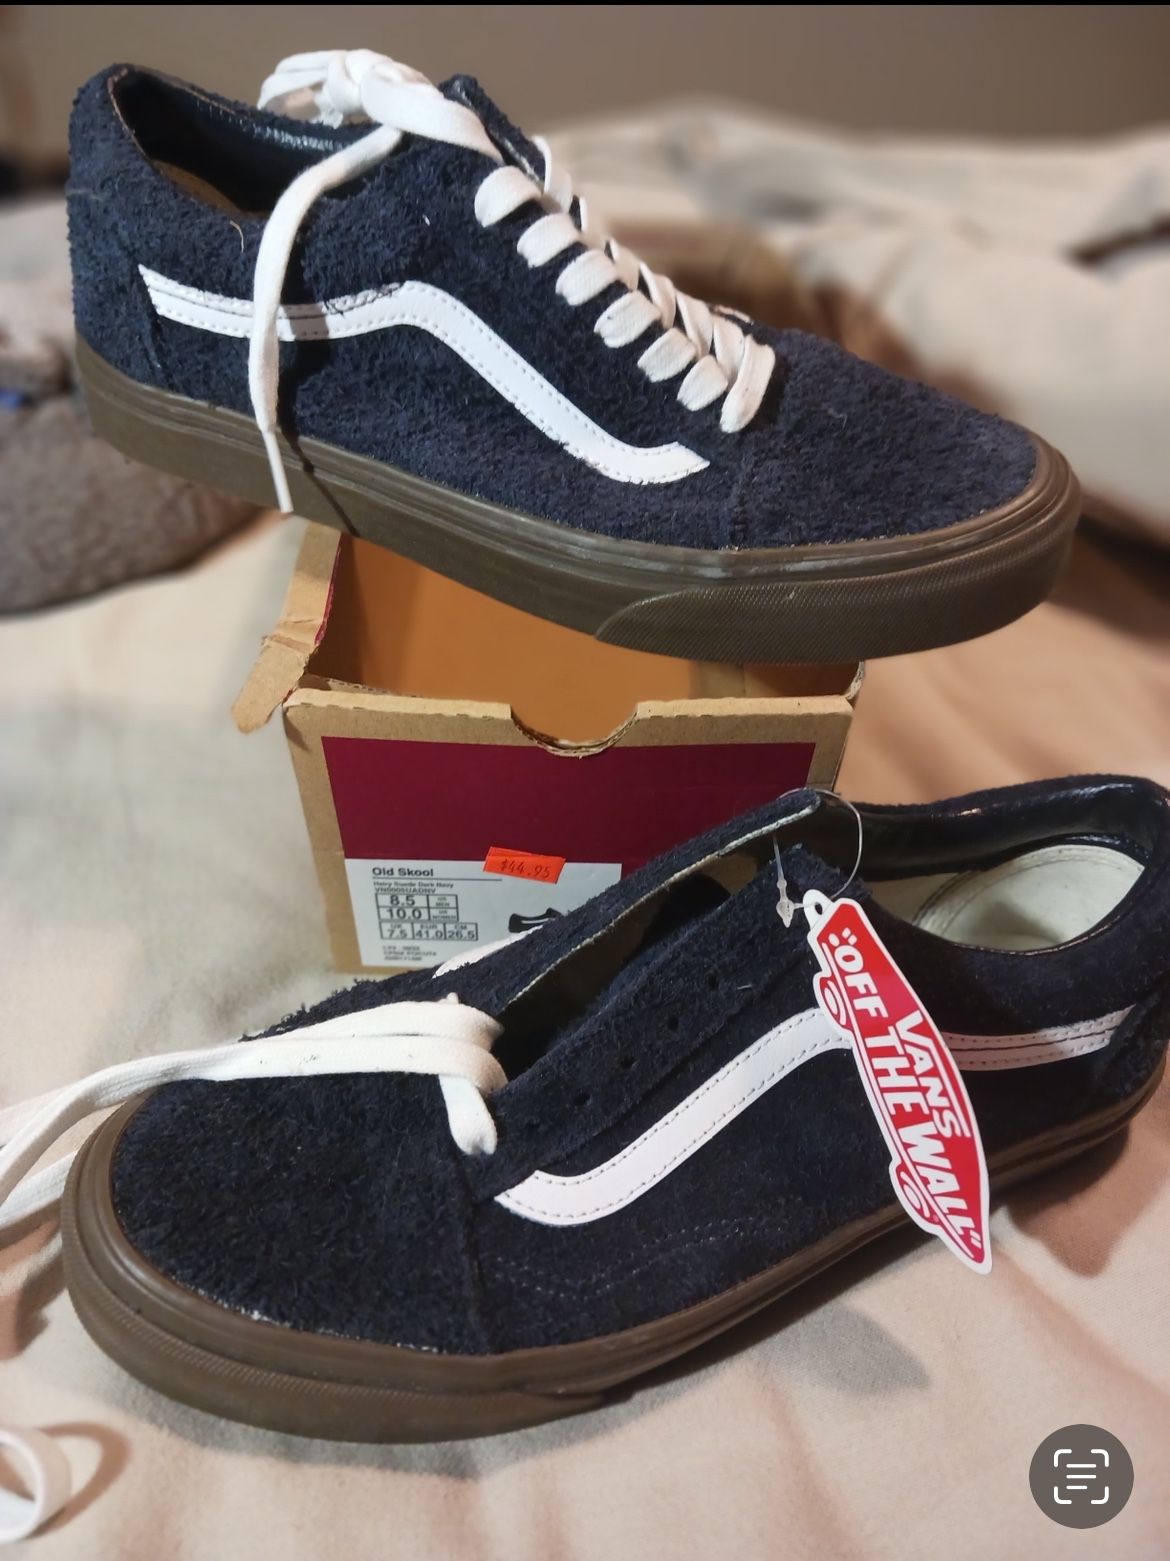 Vans New With tags navy Suede Old Shook